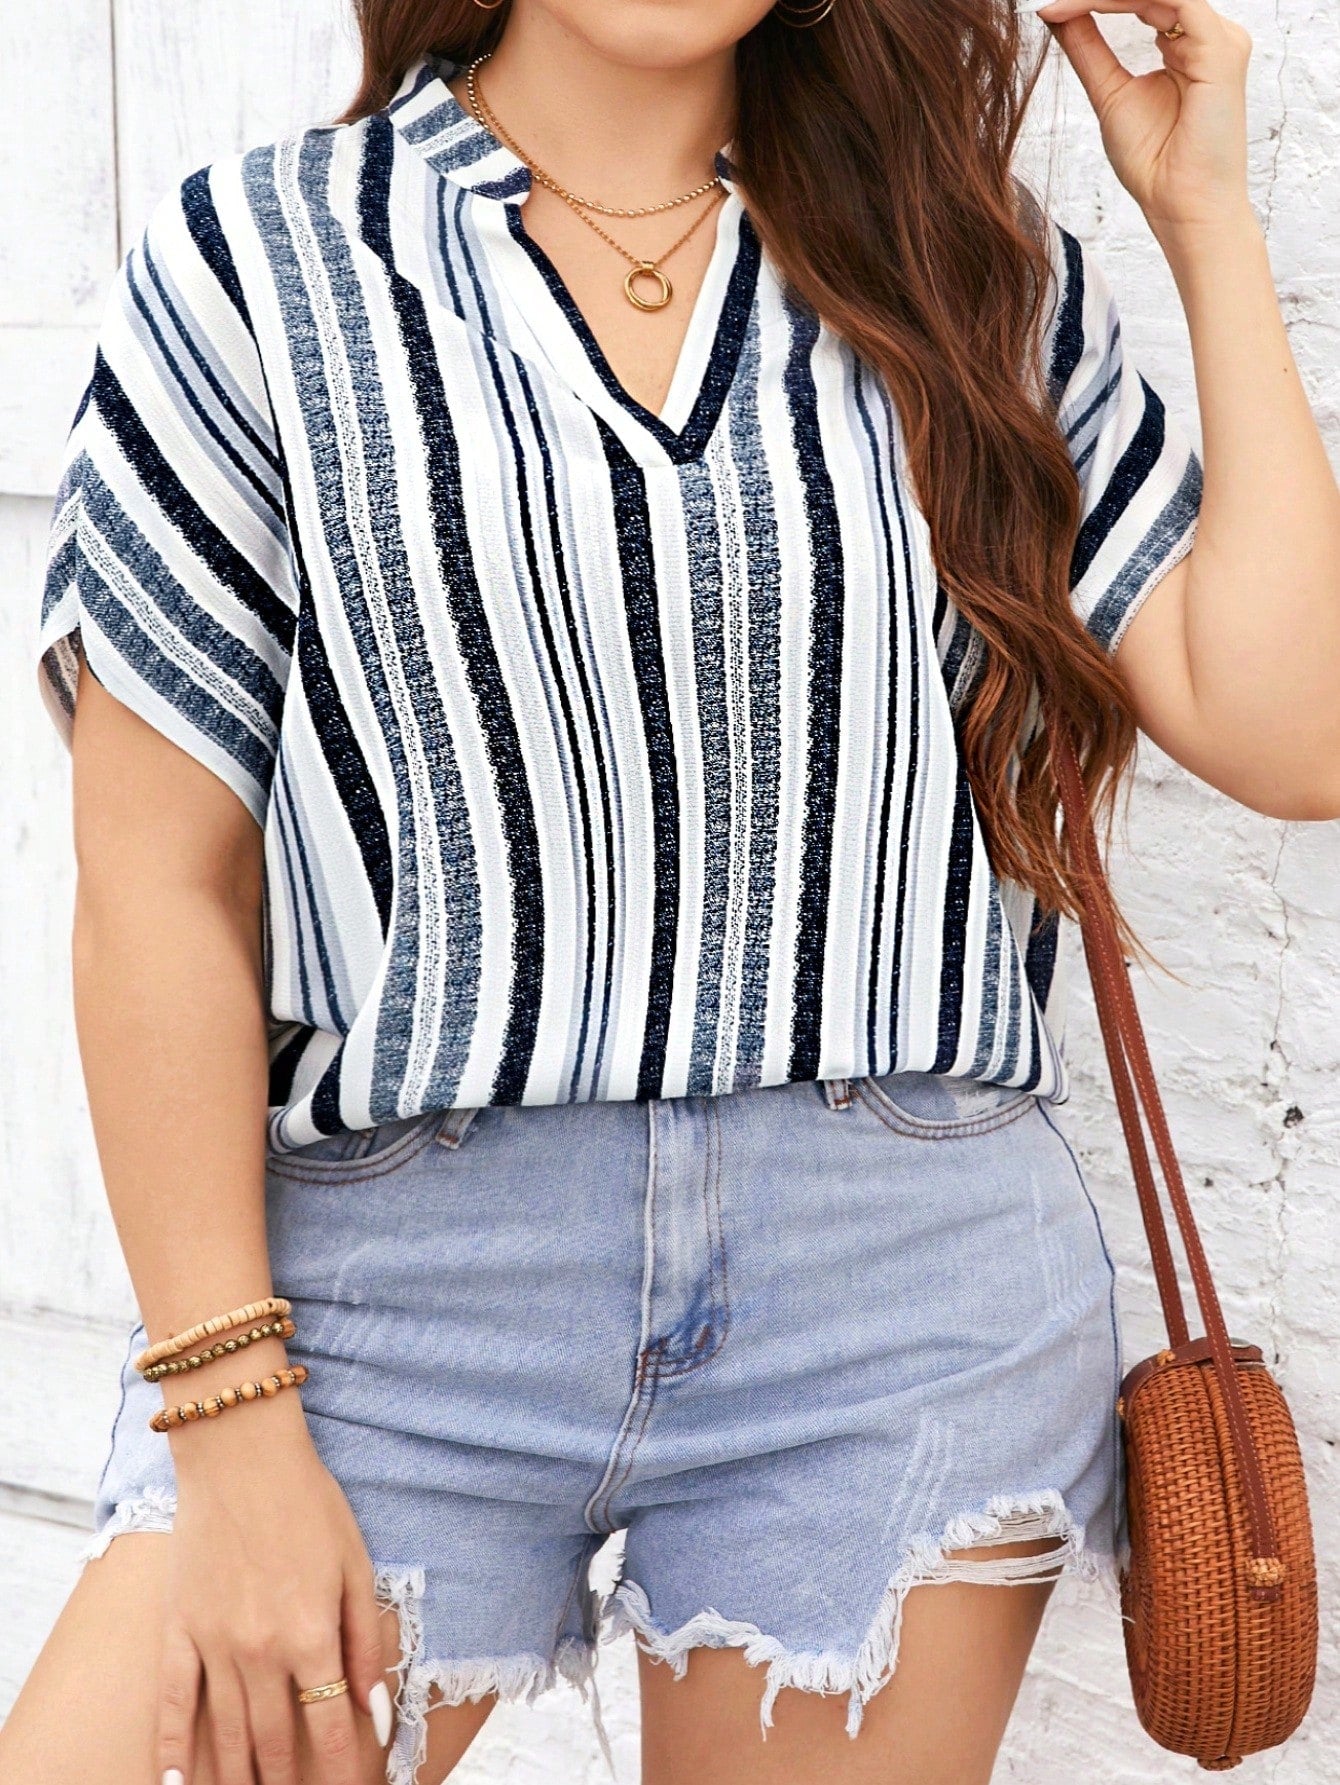 Plus Size Loose Casual Summer Shirt With Random Striped Print And Notched Collar